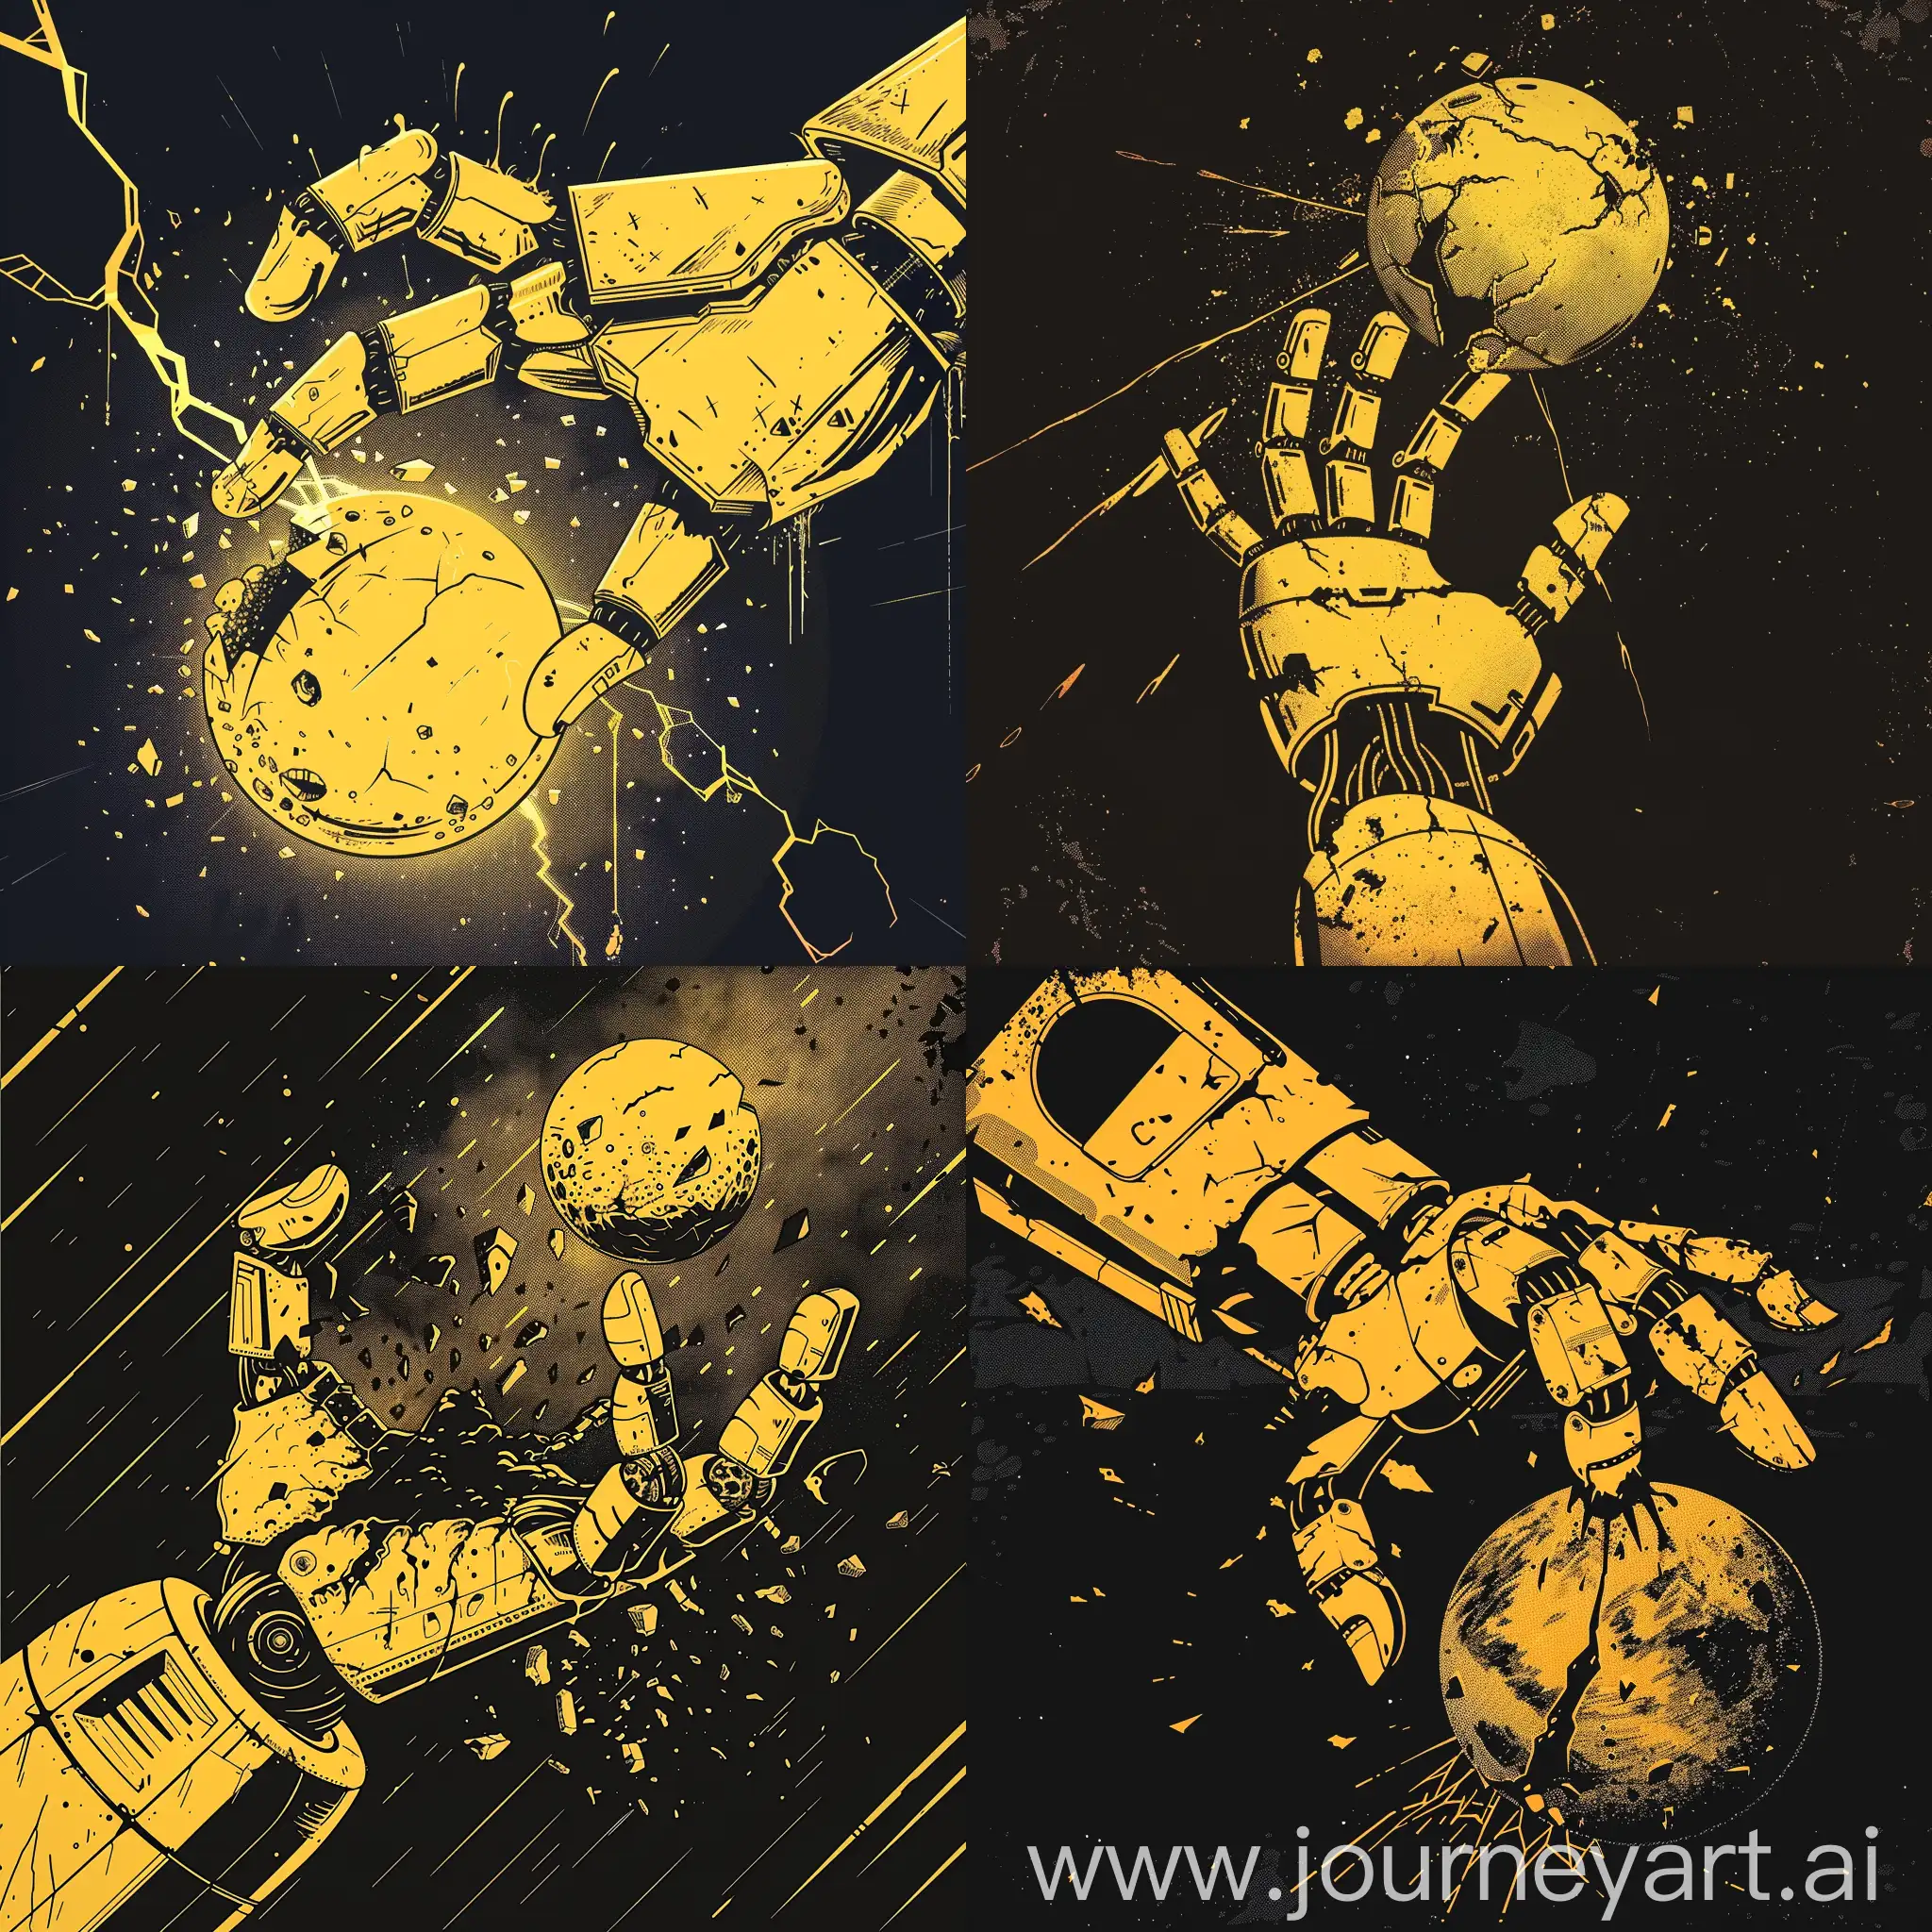 analog button of mobile moba game, there is a huge robot hand grabing a plannet, in style of yellow silhouette, the planet is cracking, slender hand, epic